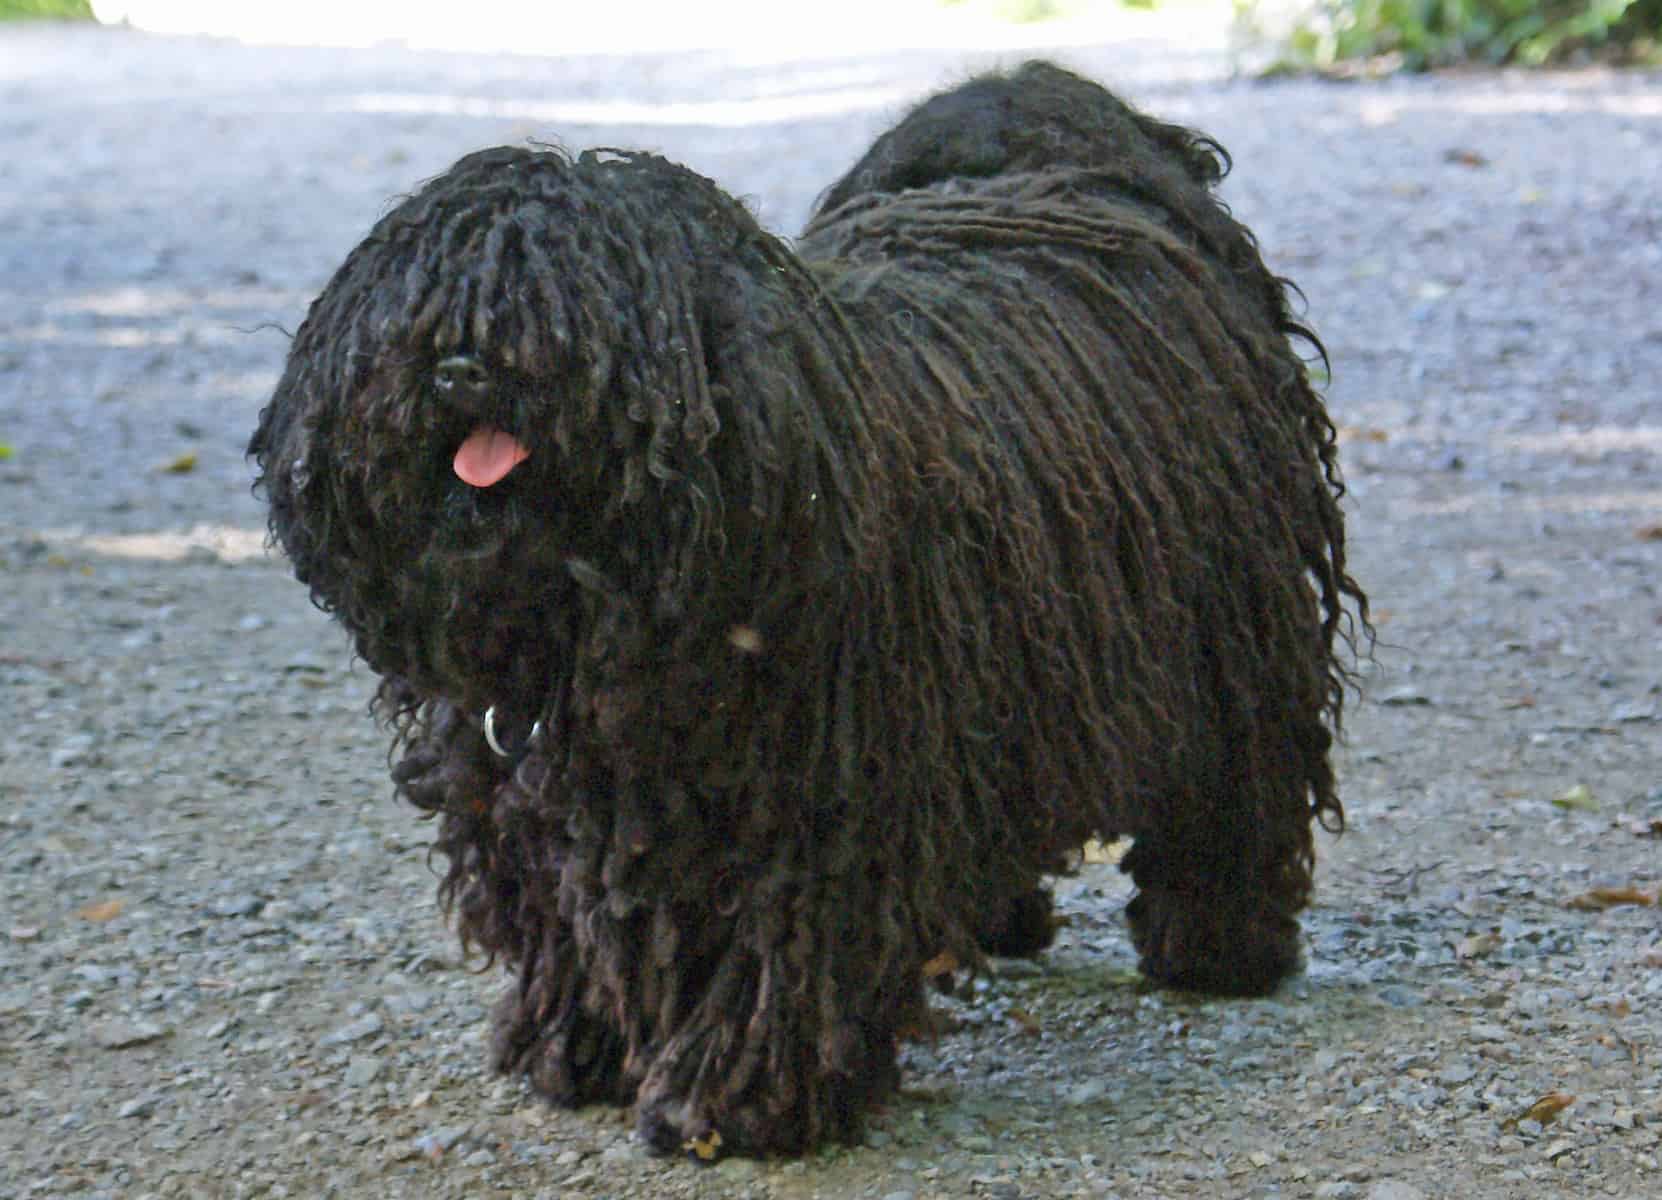 Black Puli with a corded coat